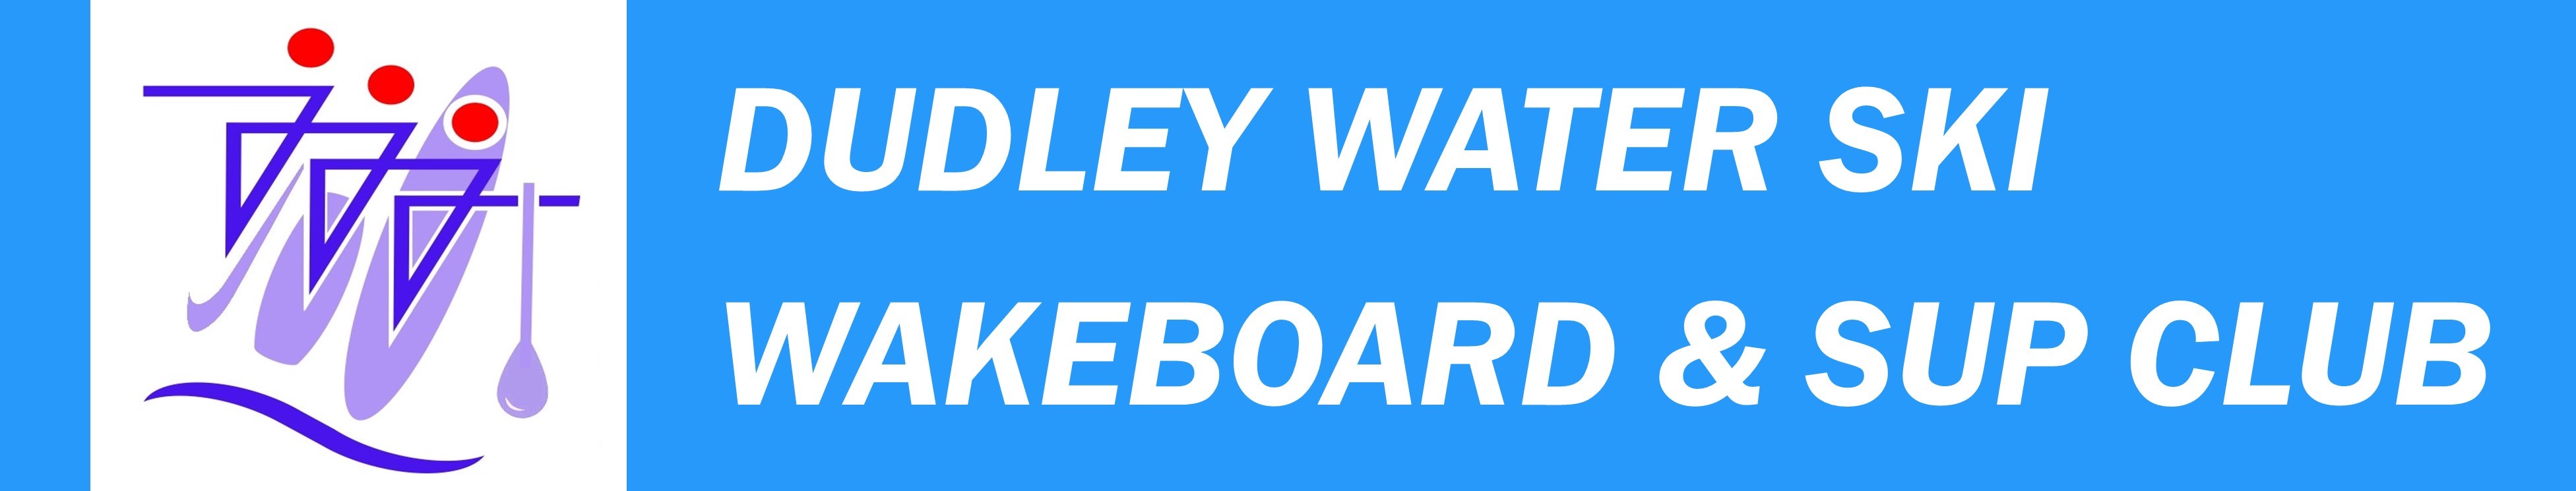 Dudley Water Ski, Wakeboard and Stand Up Paddle Board Club logo